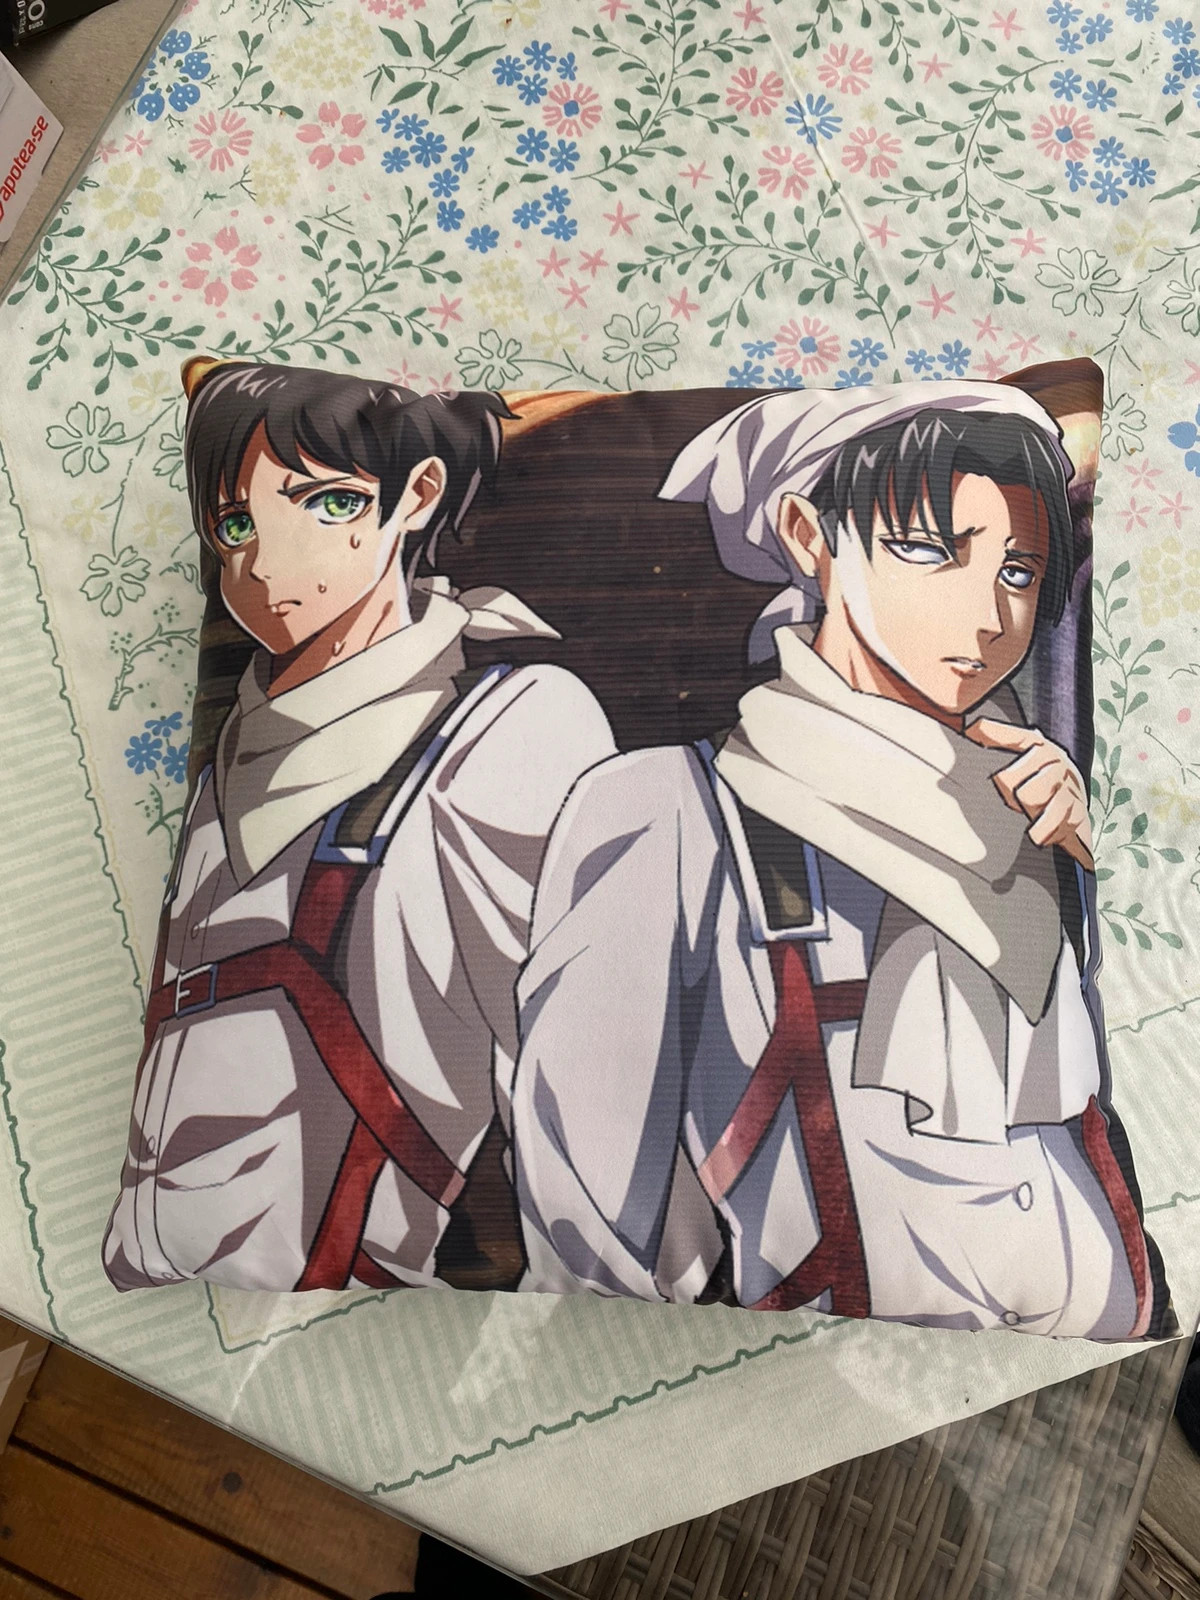 Decorative Pillow with Eren and Levi